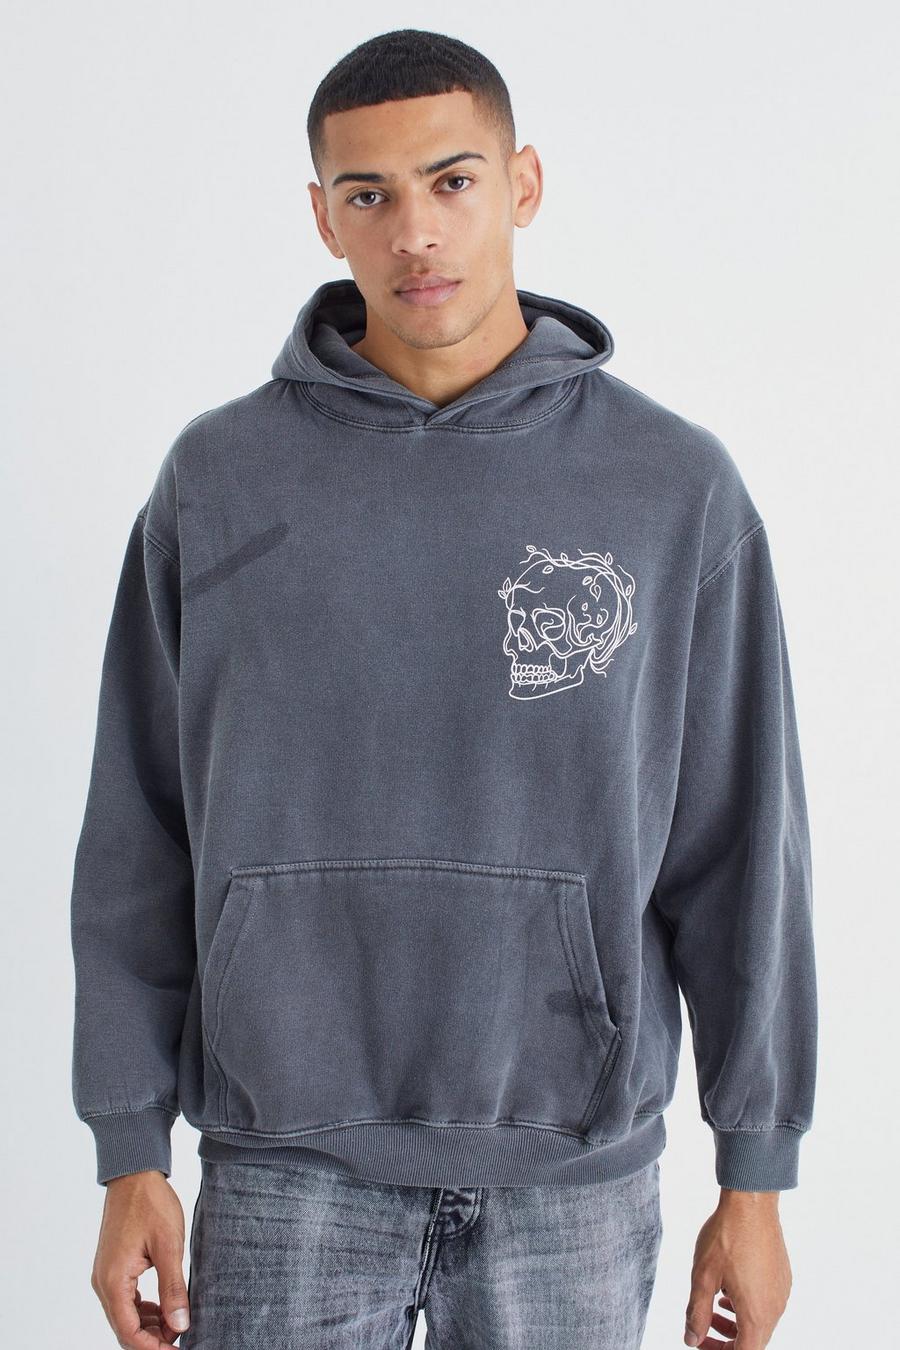 Charcoal grey Oversized Overdye Stencil Graphic Hoodie 